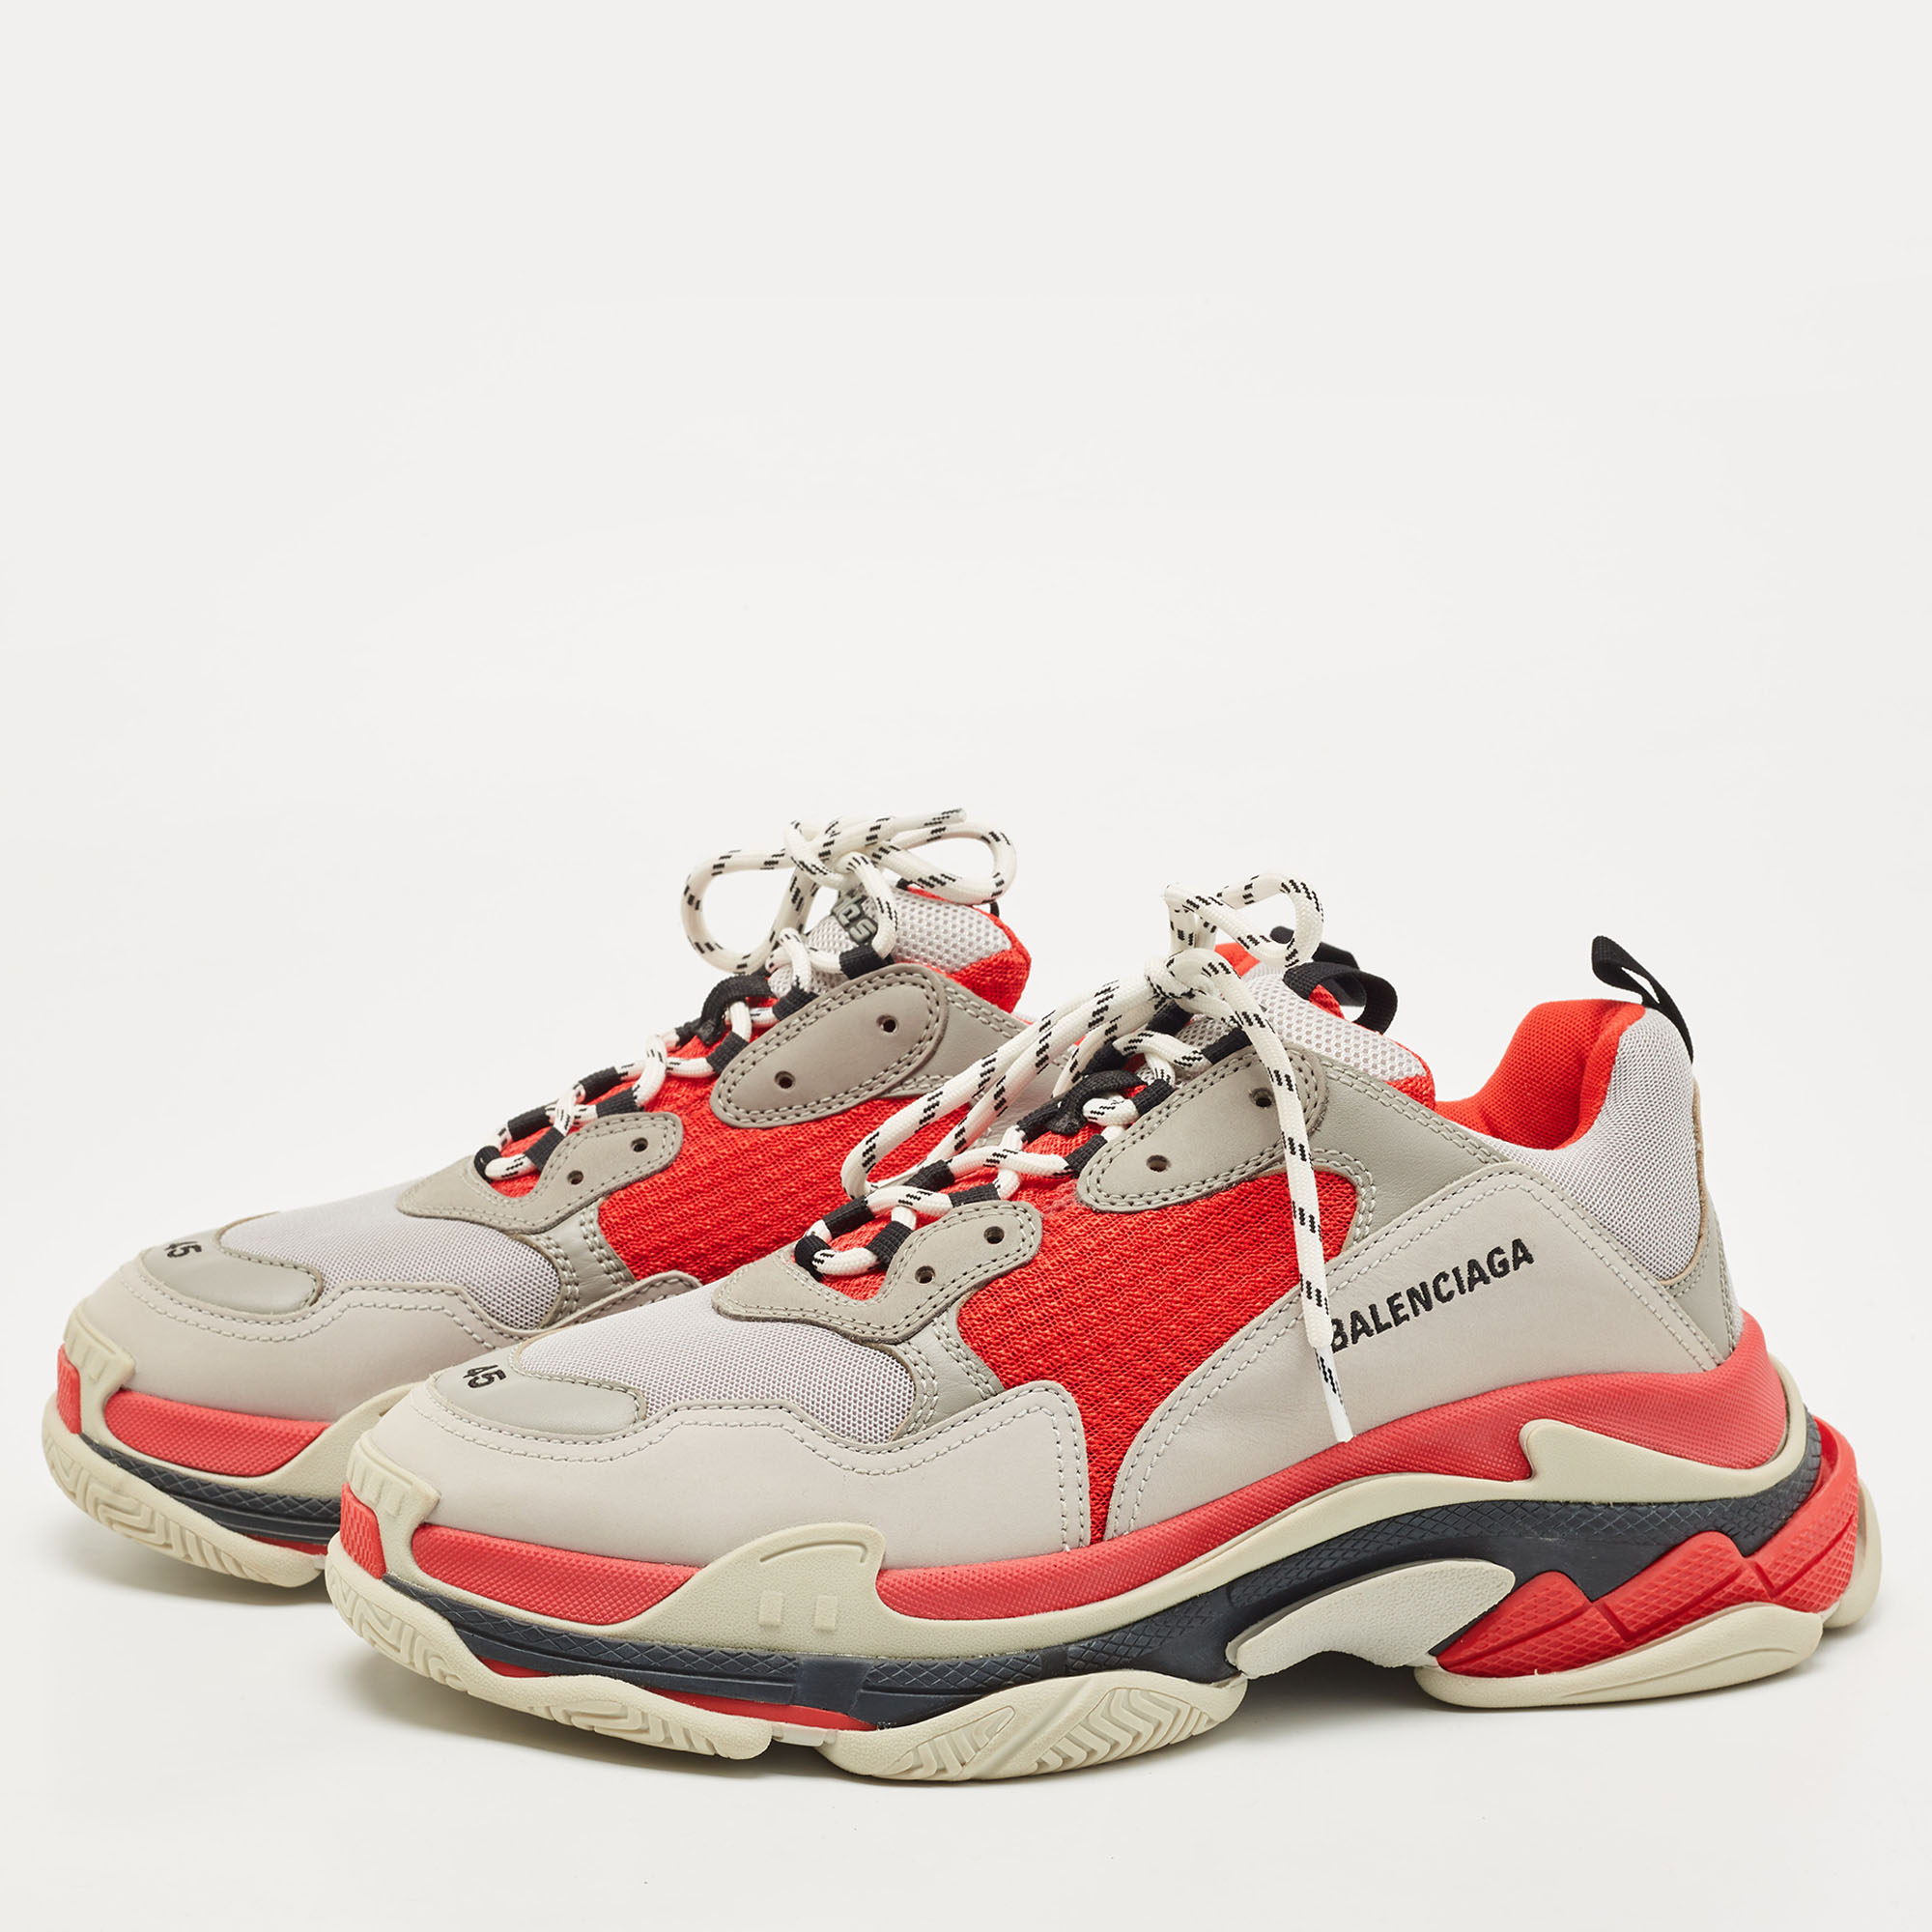 

Balenciaga Red/Grey Mesh and Nubuck Triple S Low Top Sneakers Size